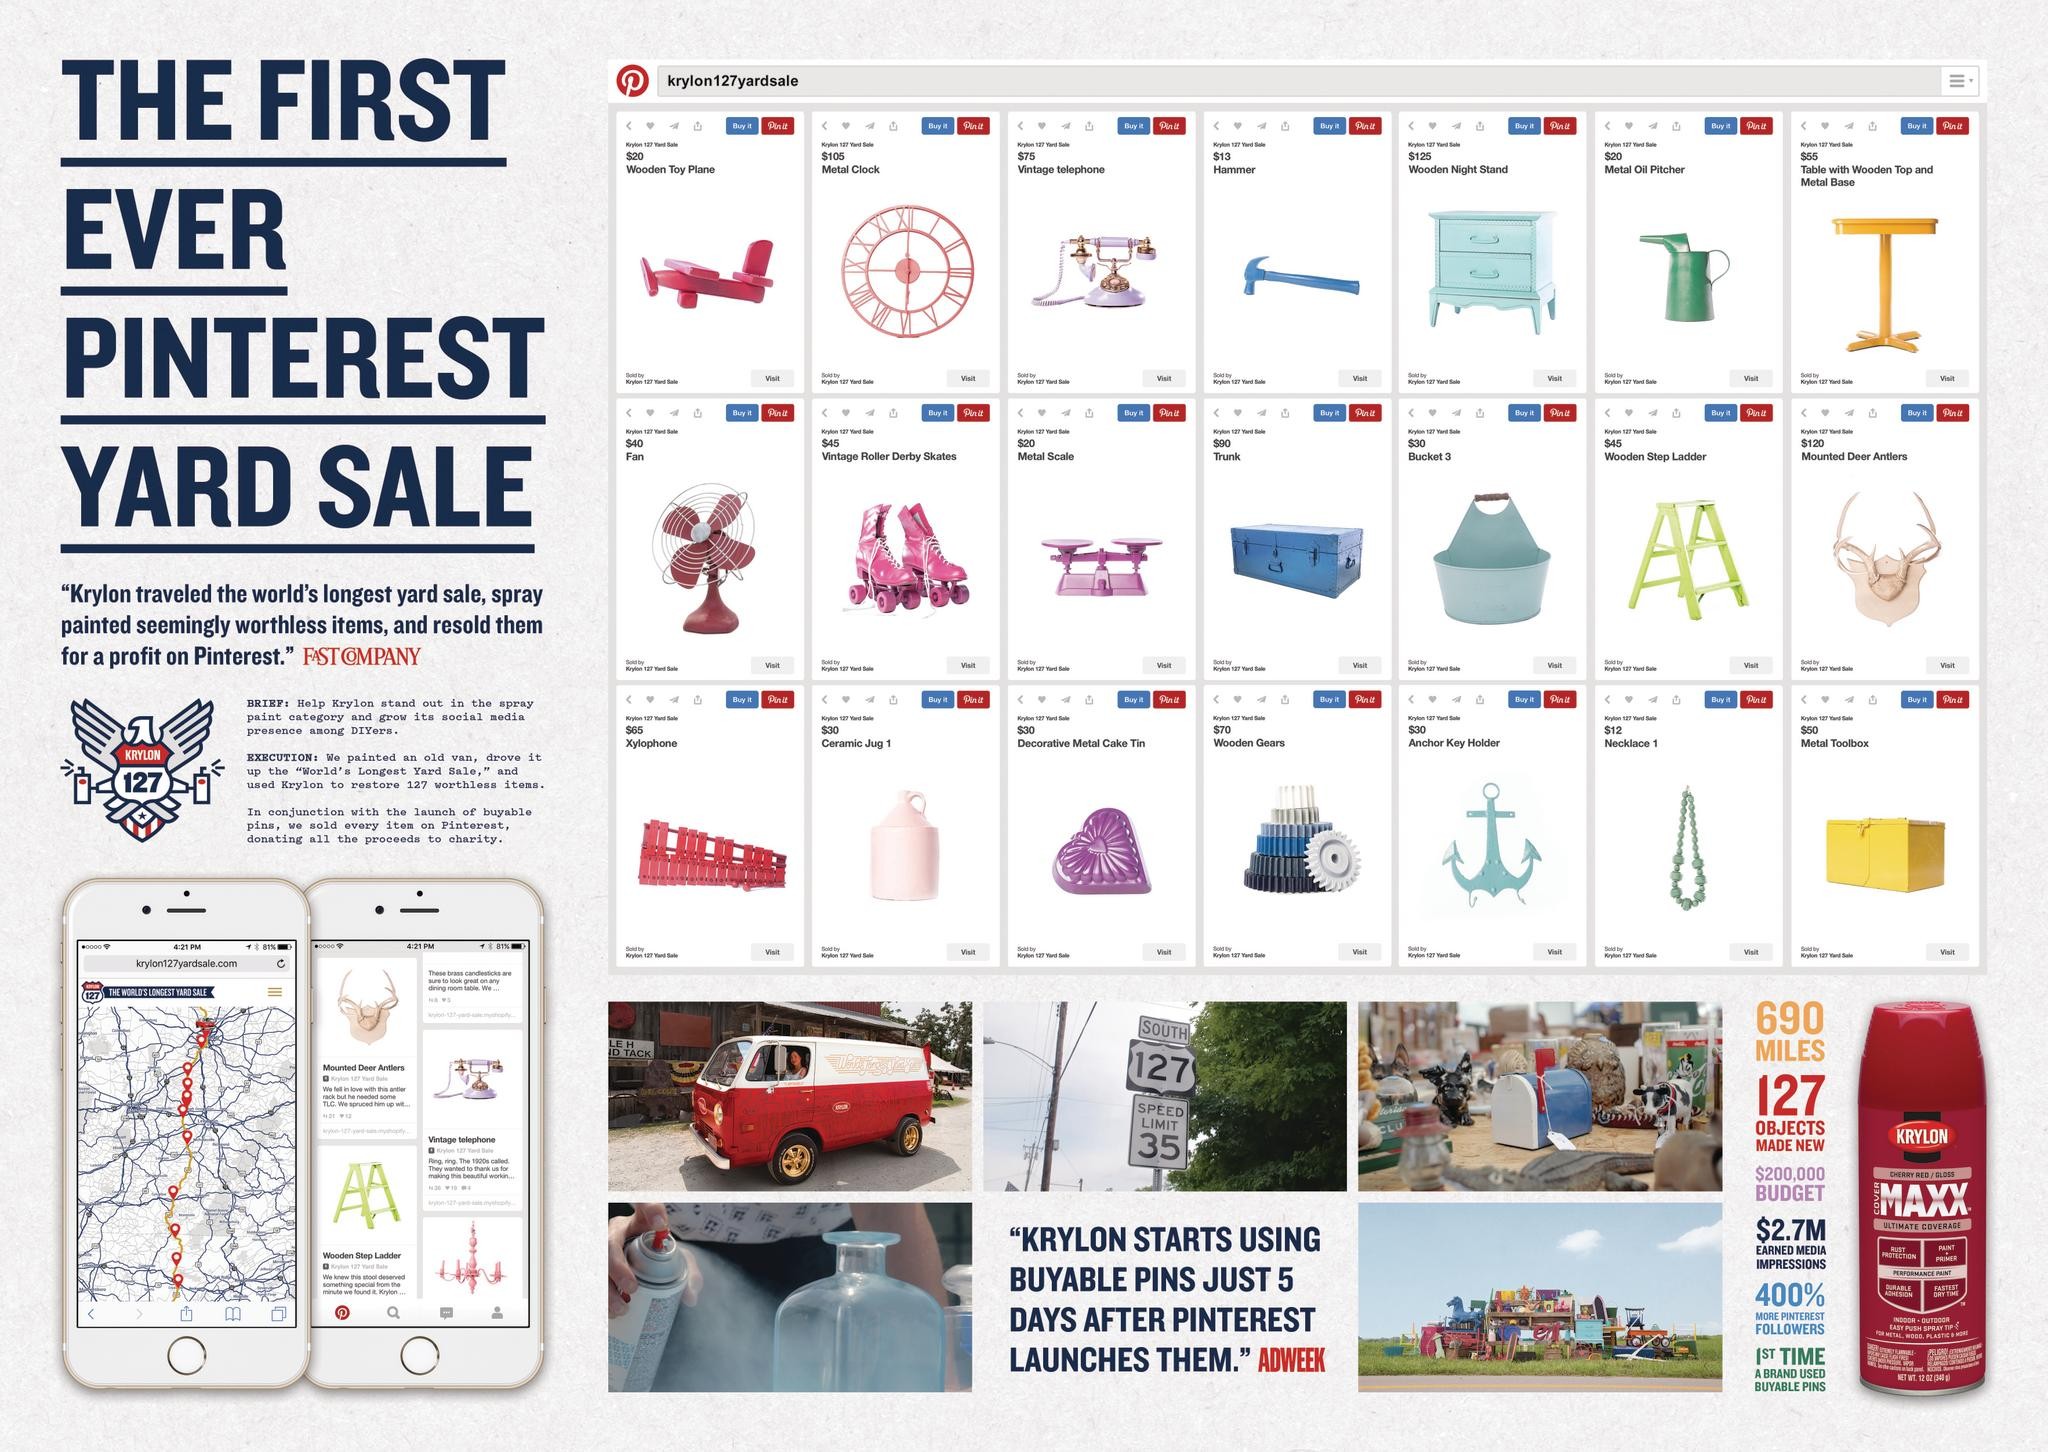 THE FIRST EVER PINTEREST YARD SALE